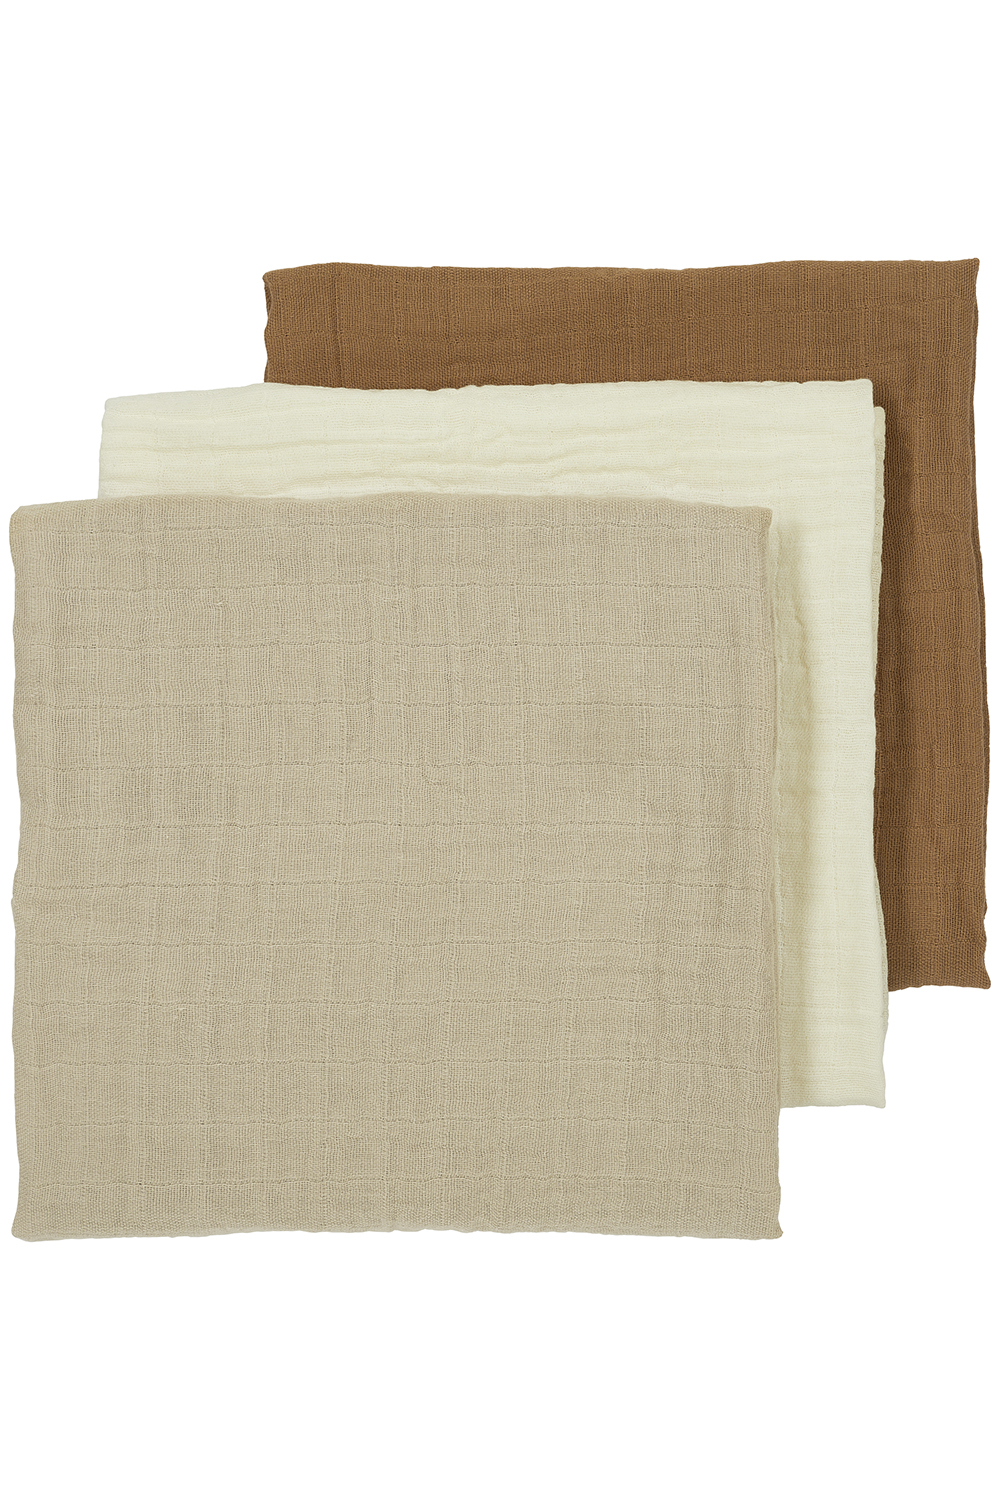 Pre-washed Musselin Mullwindeln 3er pack Uni - offwhite/sand/toffee - 70x70cm